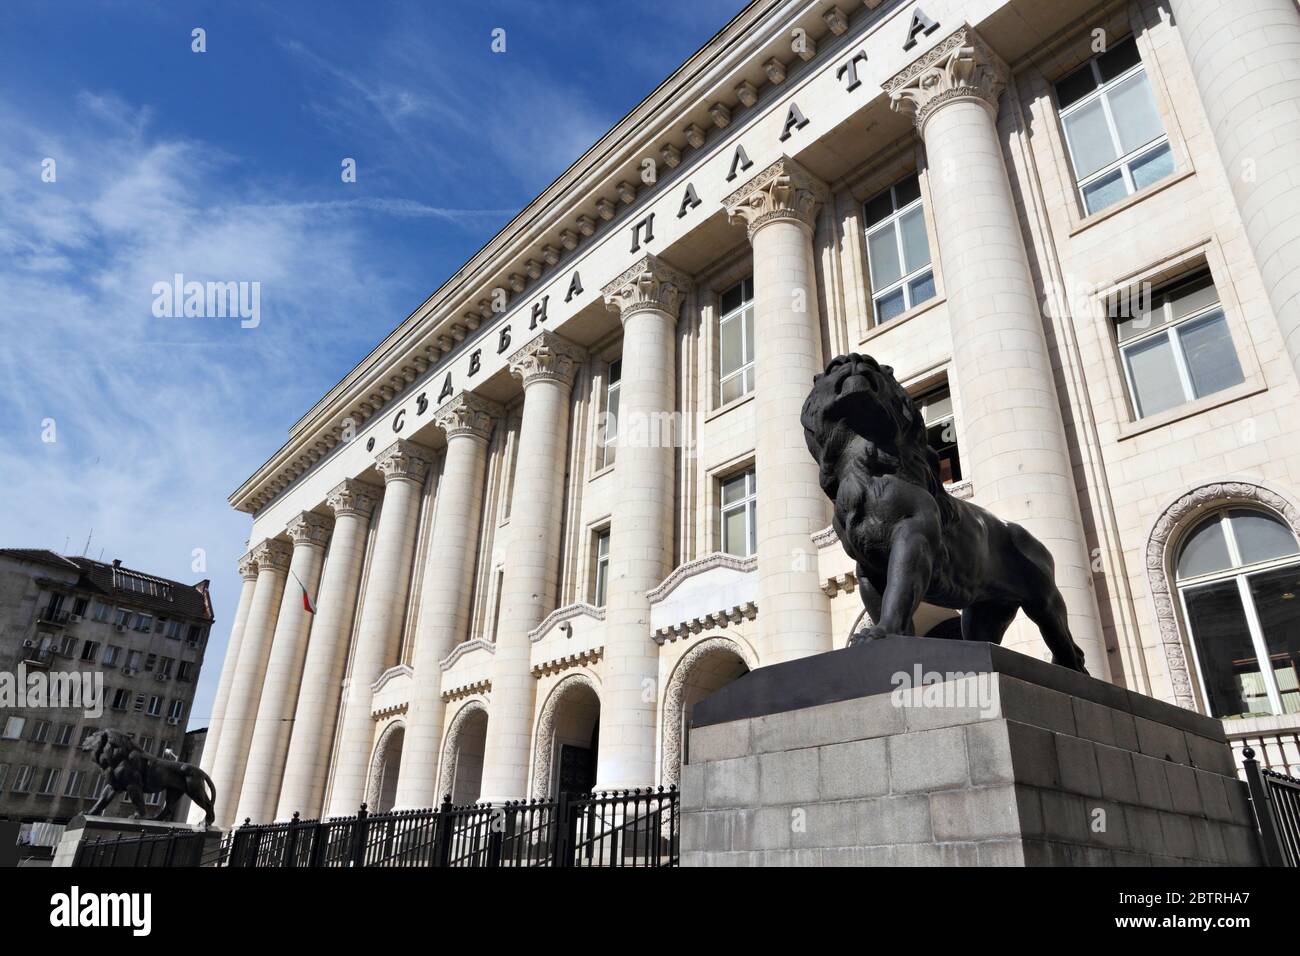 Courthouse in Sofia, Bulgaria - Palace of Justice. Stock Photo